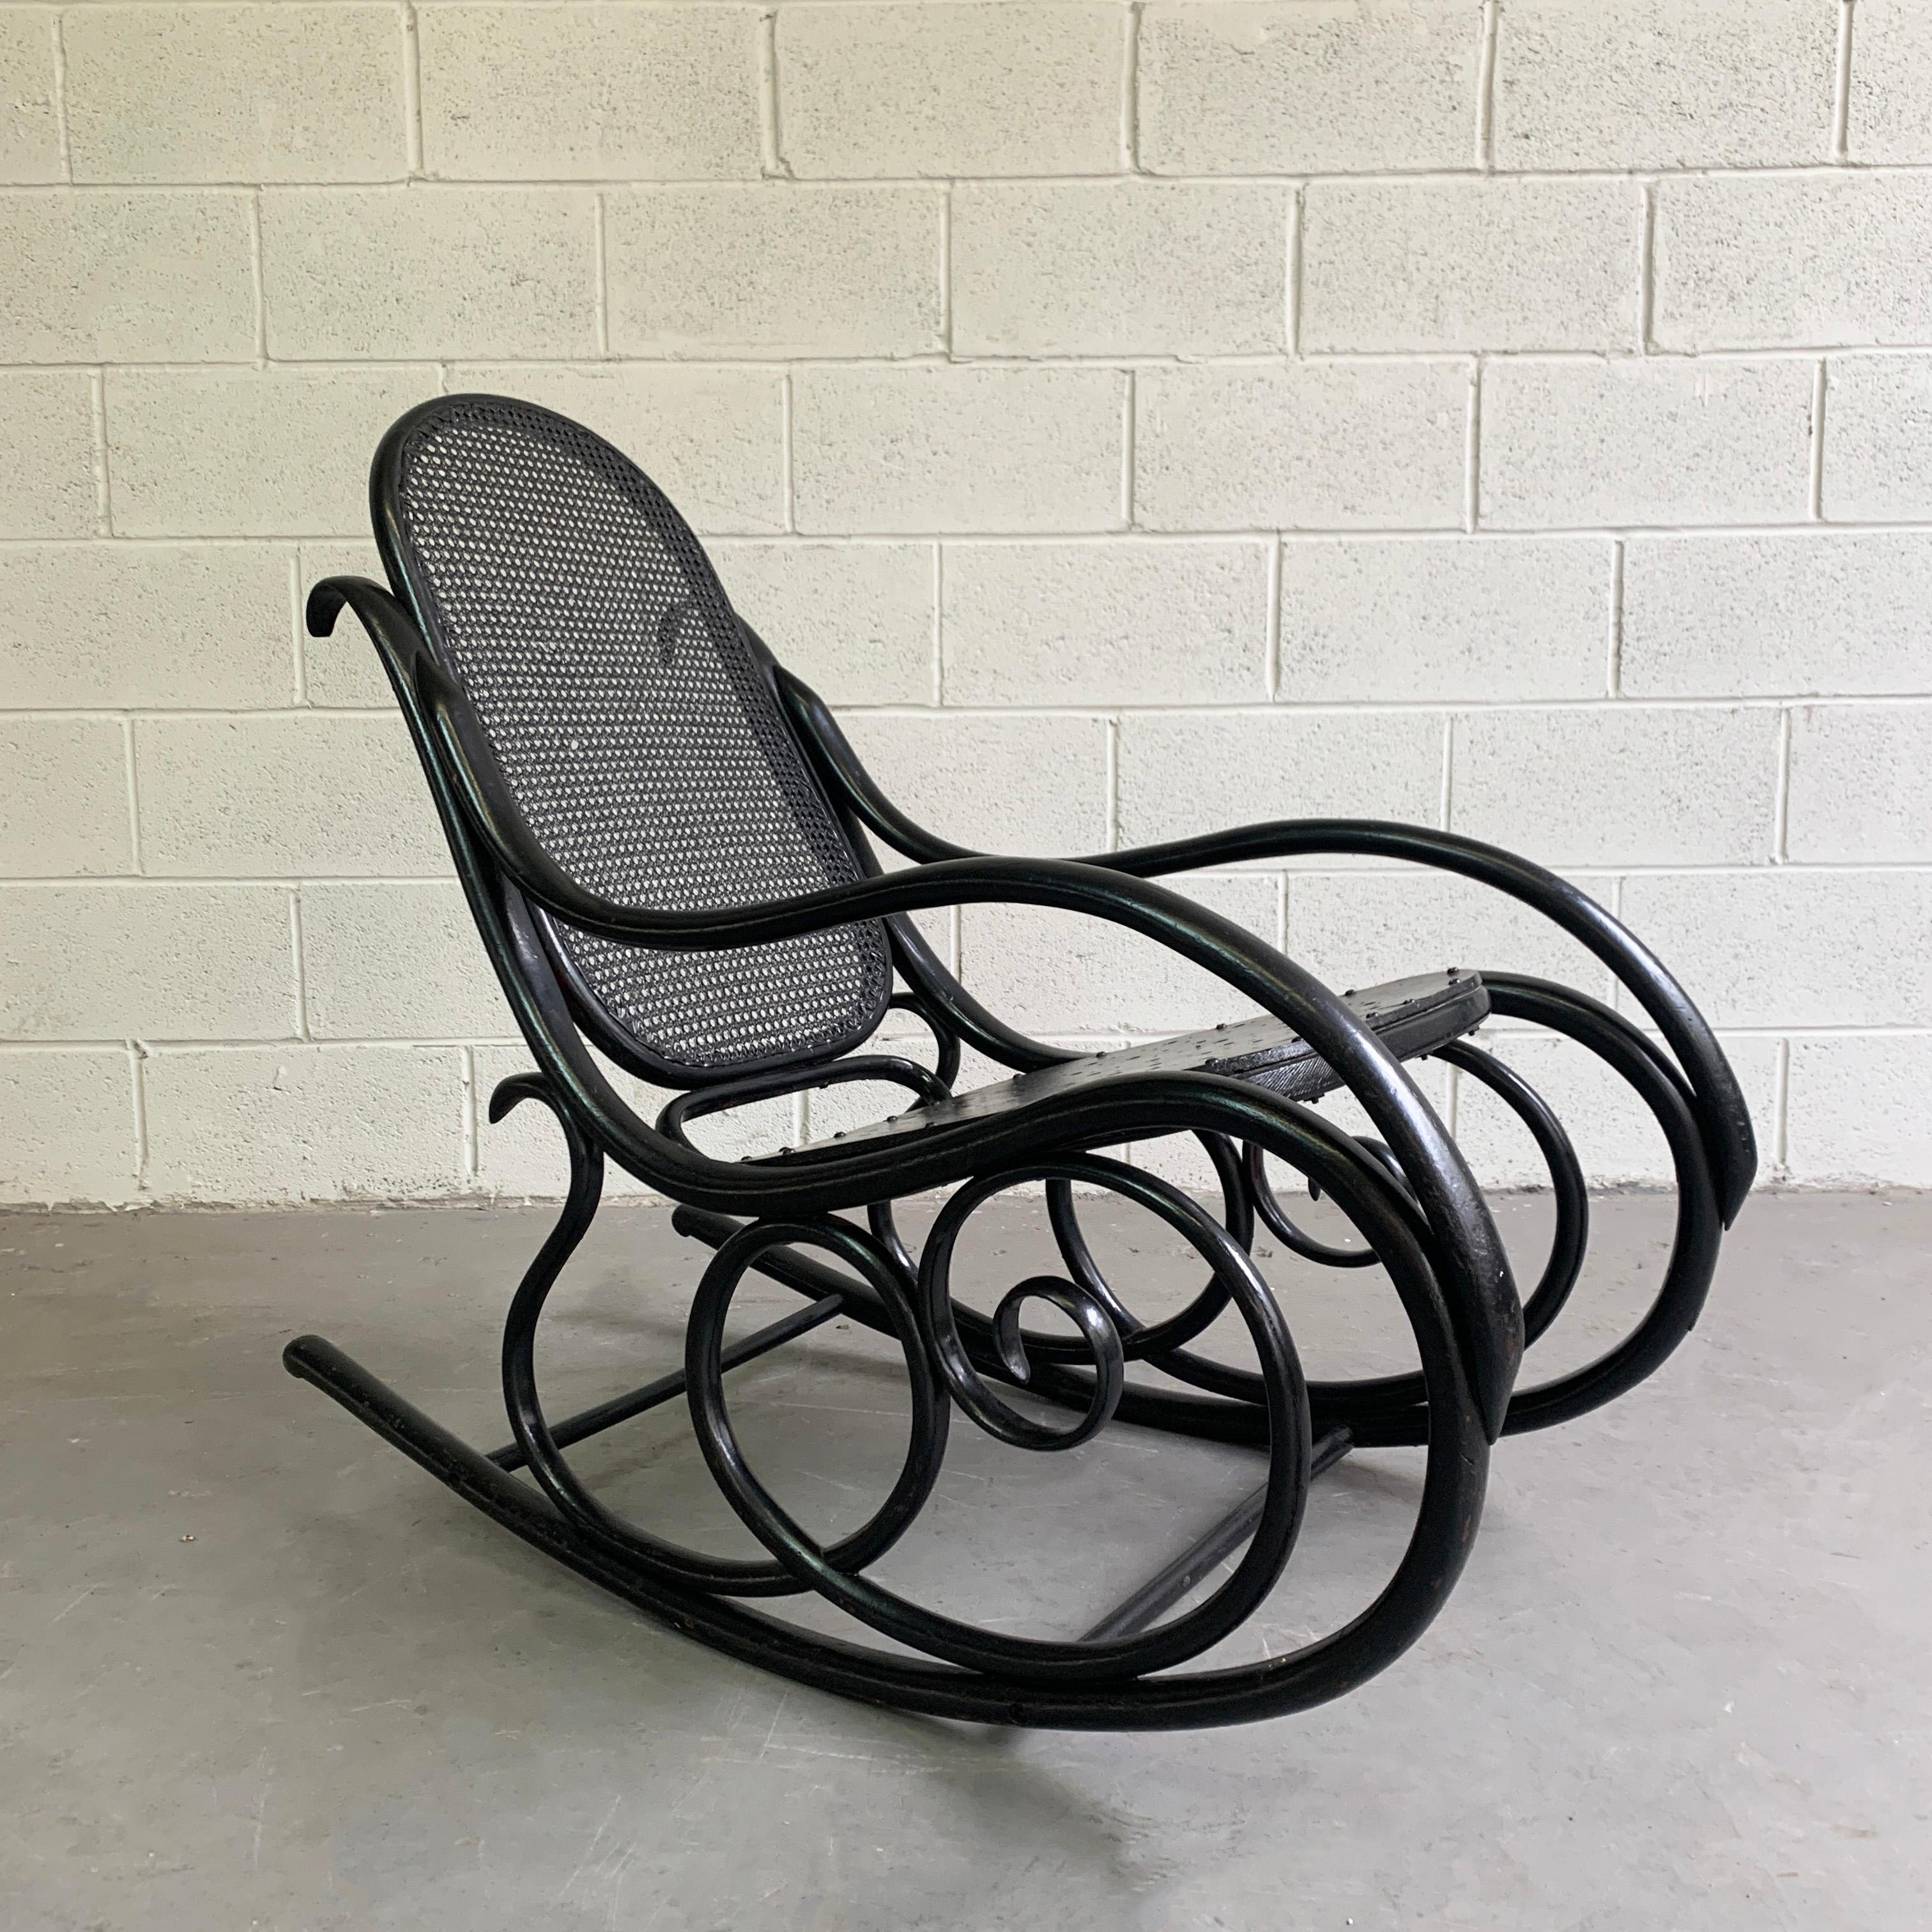 Early 20th century rocking chair by Thonet features a scrolled bentwood frame, caned back and perforated wood seat that slopes from 17.5 to 12 inches height.